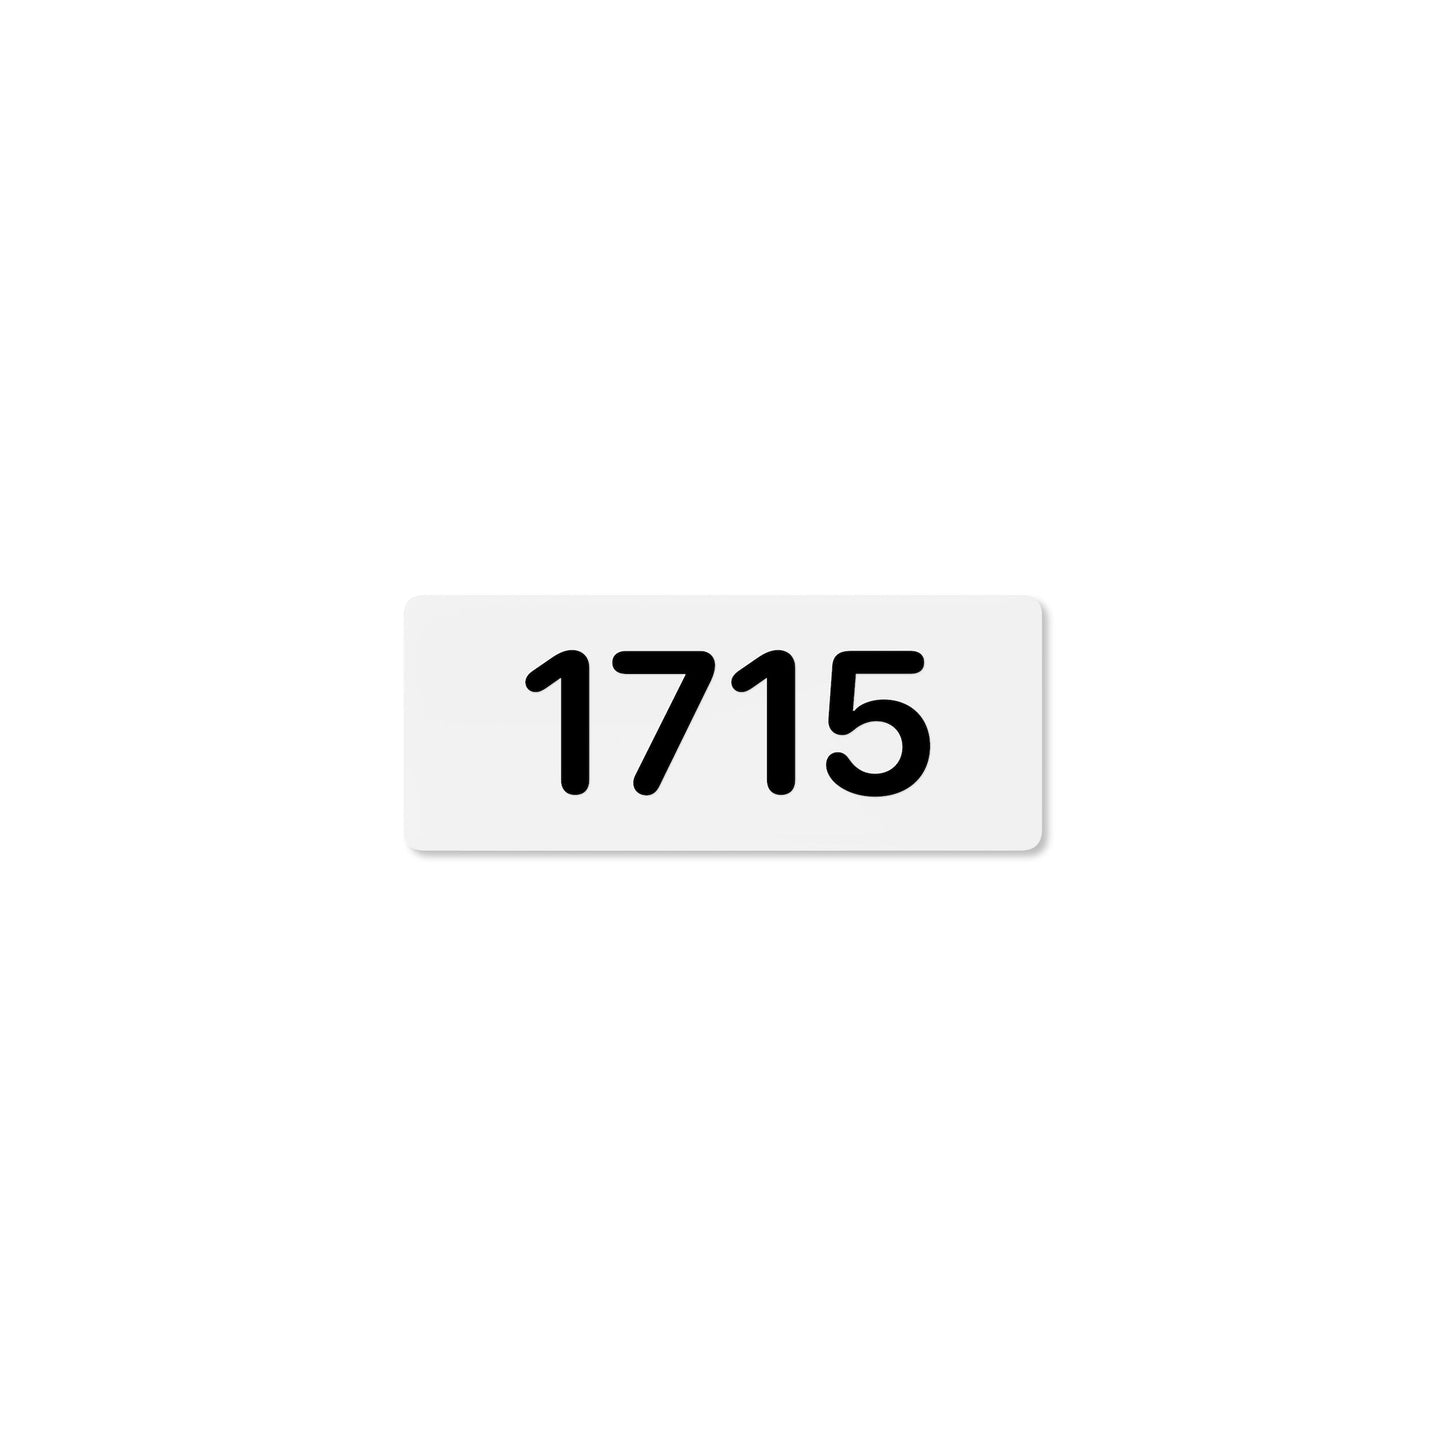 Numeral 1715